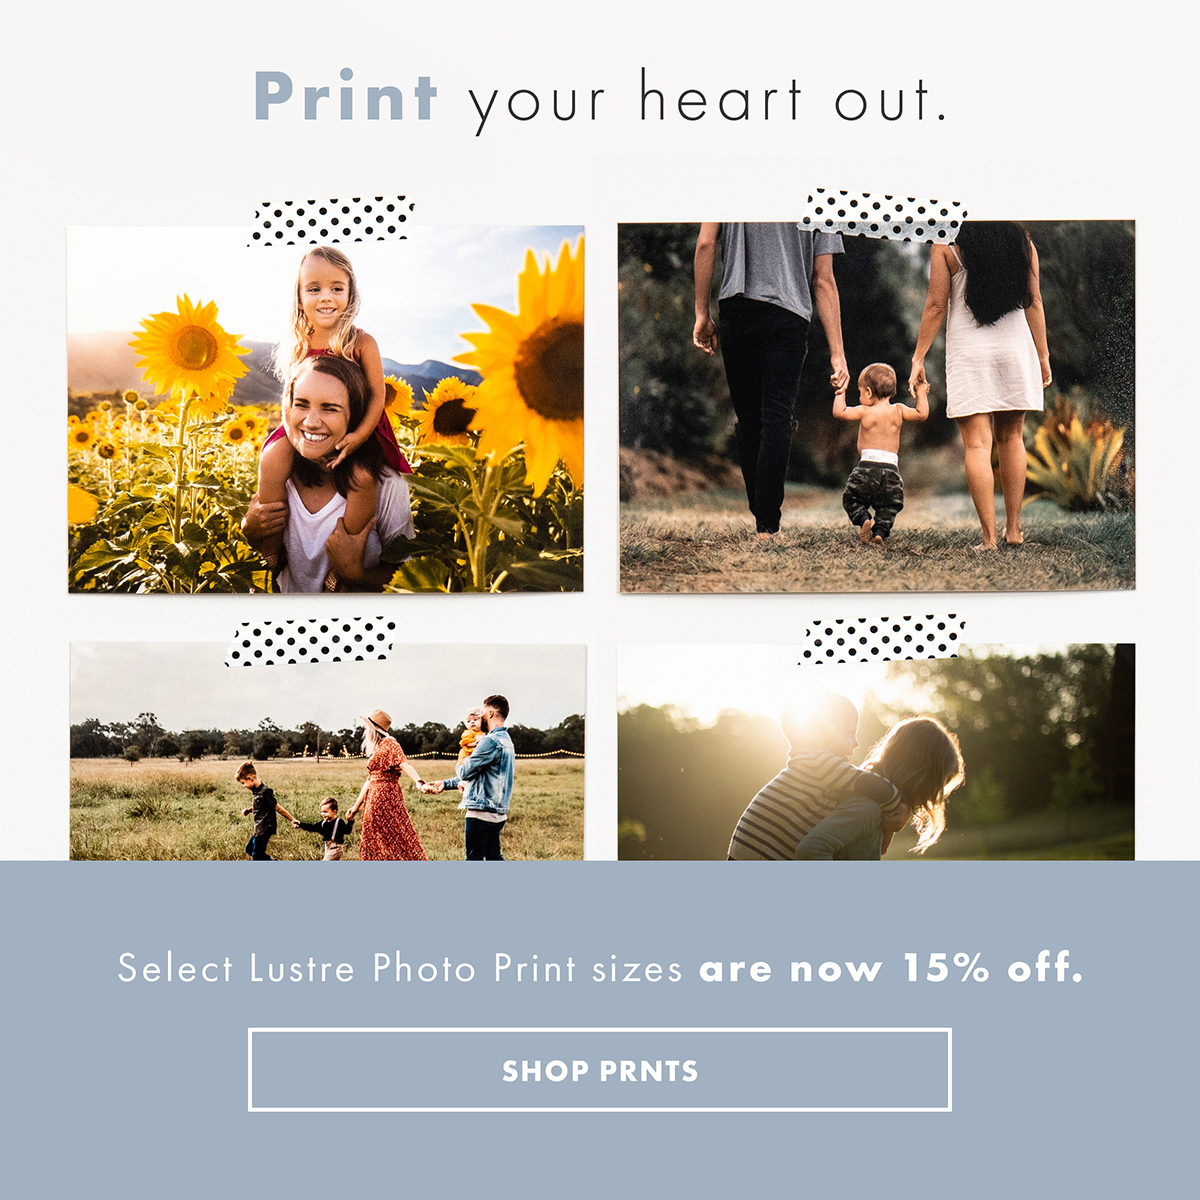 Print your heart out. Select Lustre Photo Print sizes are now 15% off. SHOP PRINTS